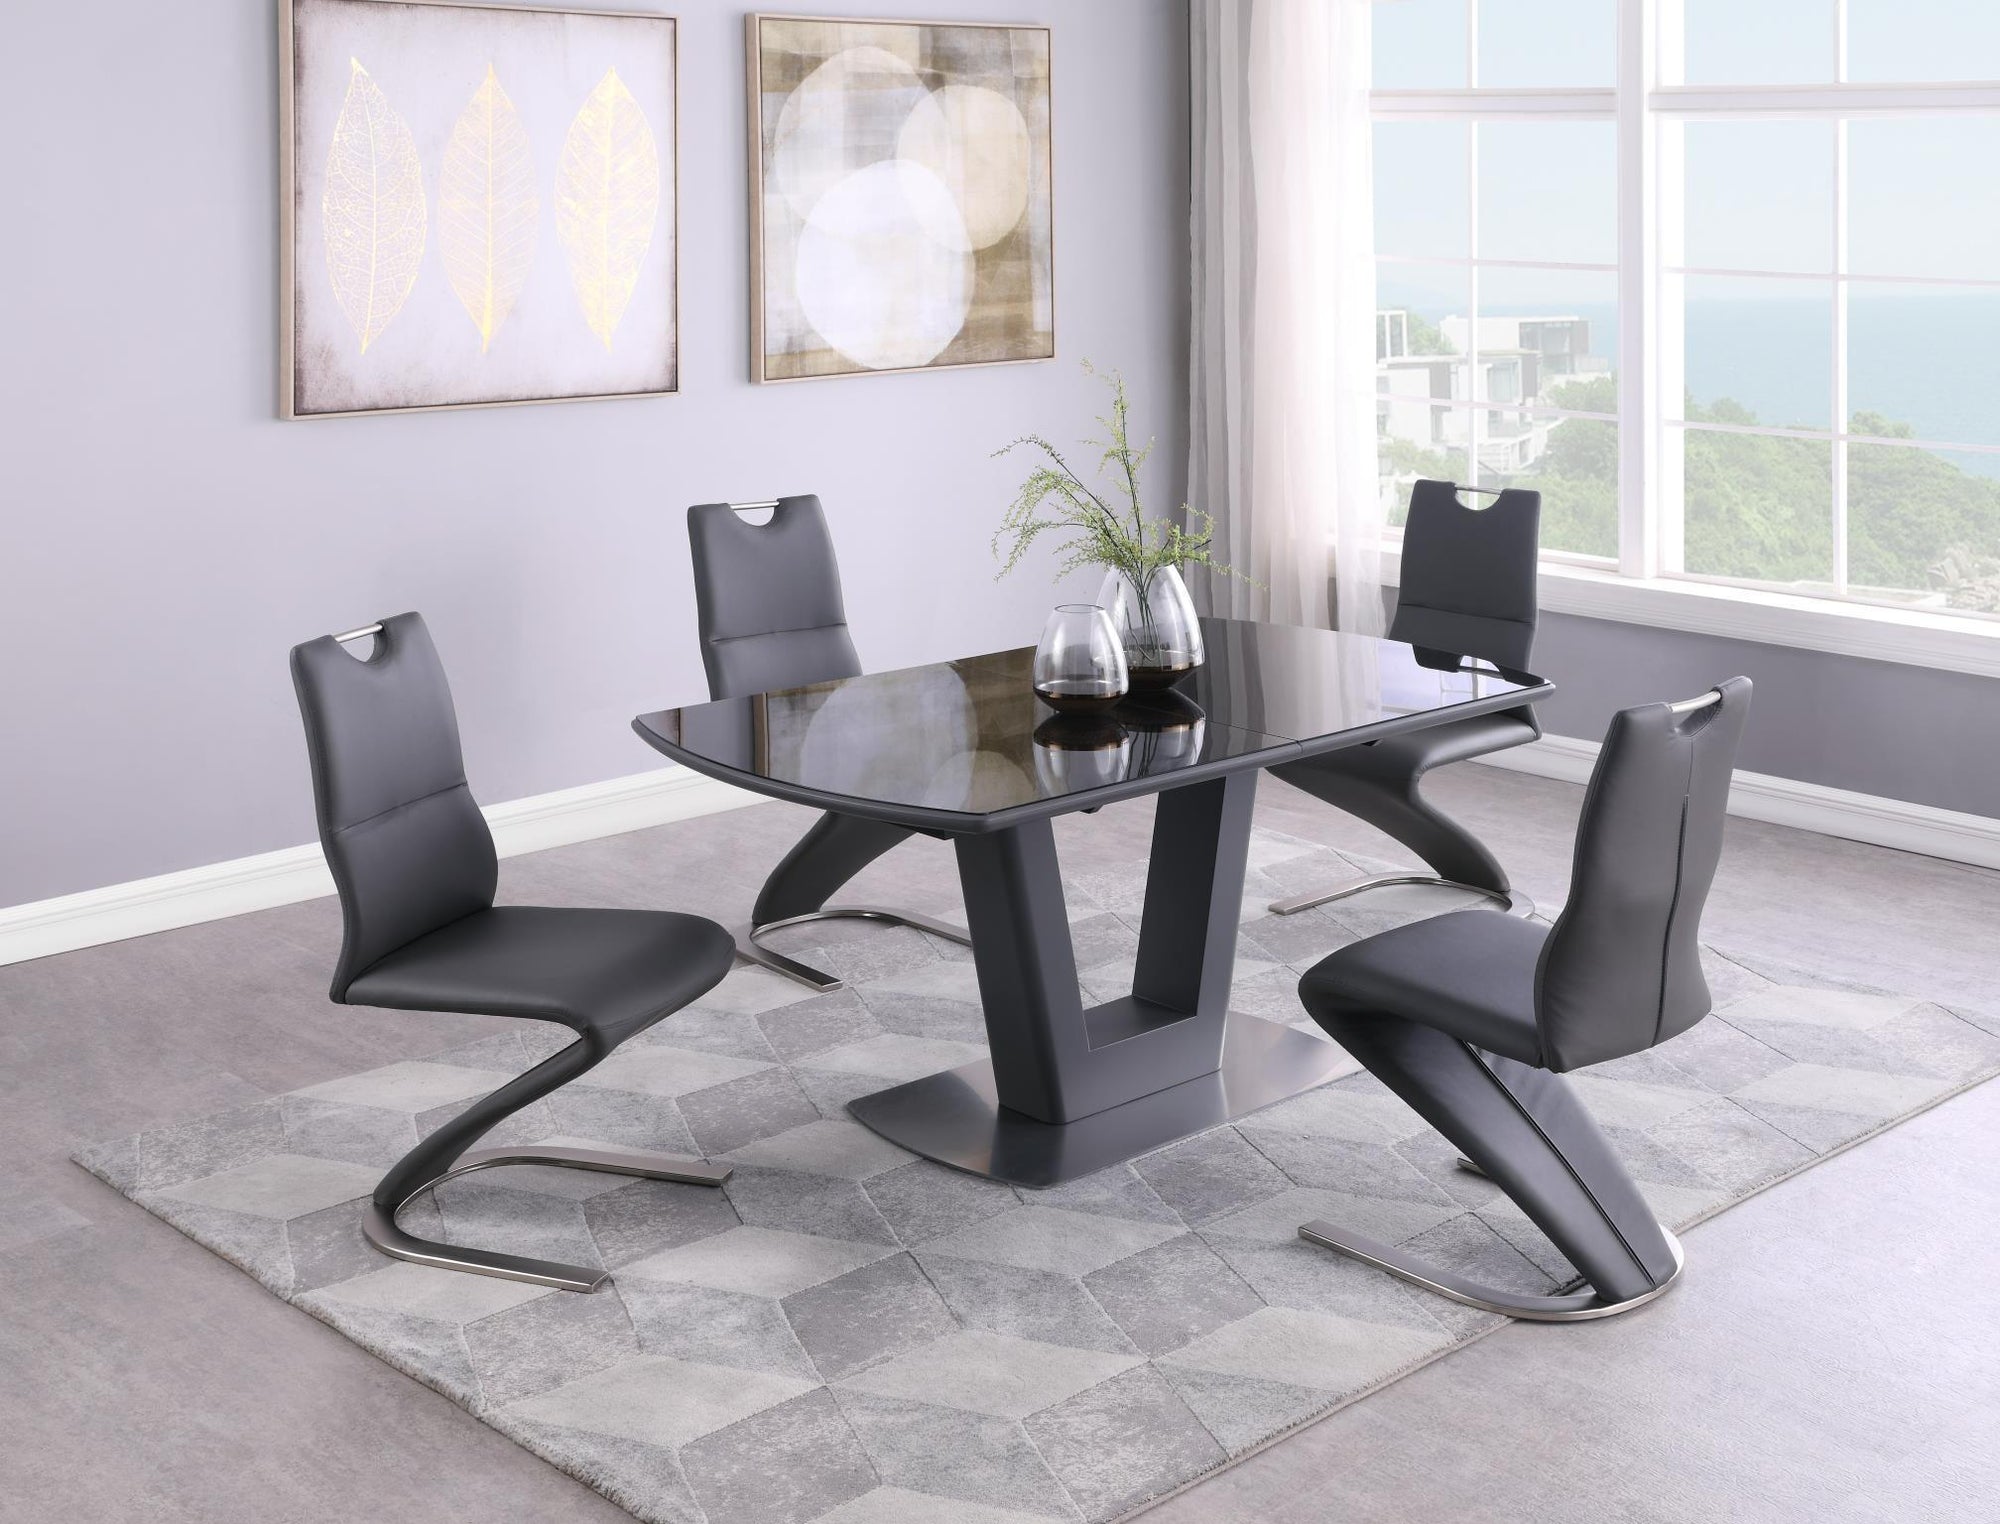 Sienna Dining Chair - Euro Living Furniture